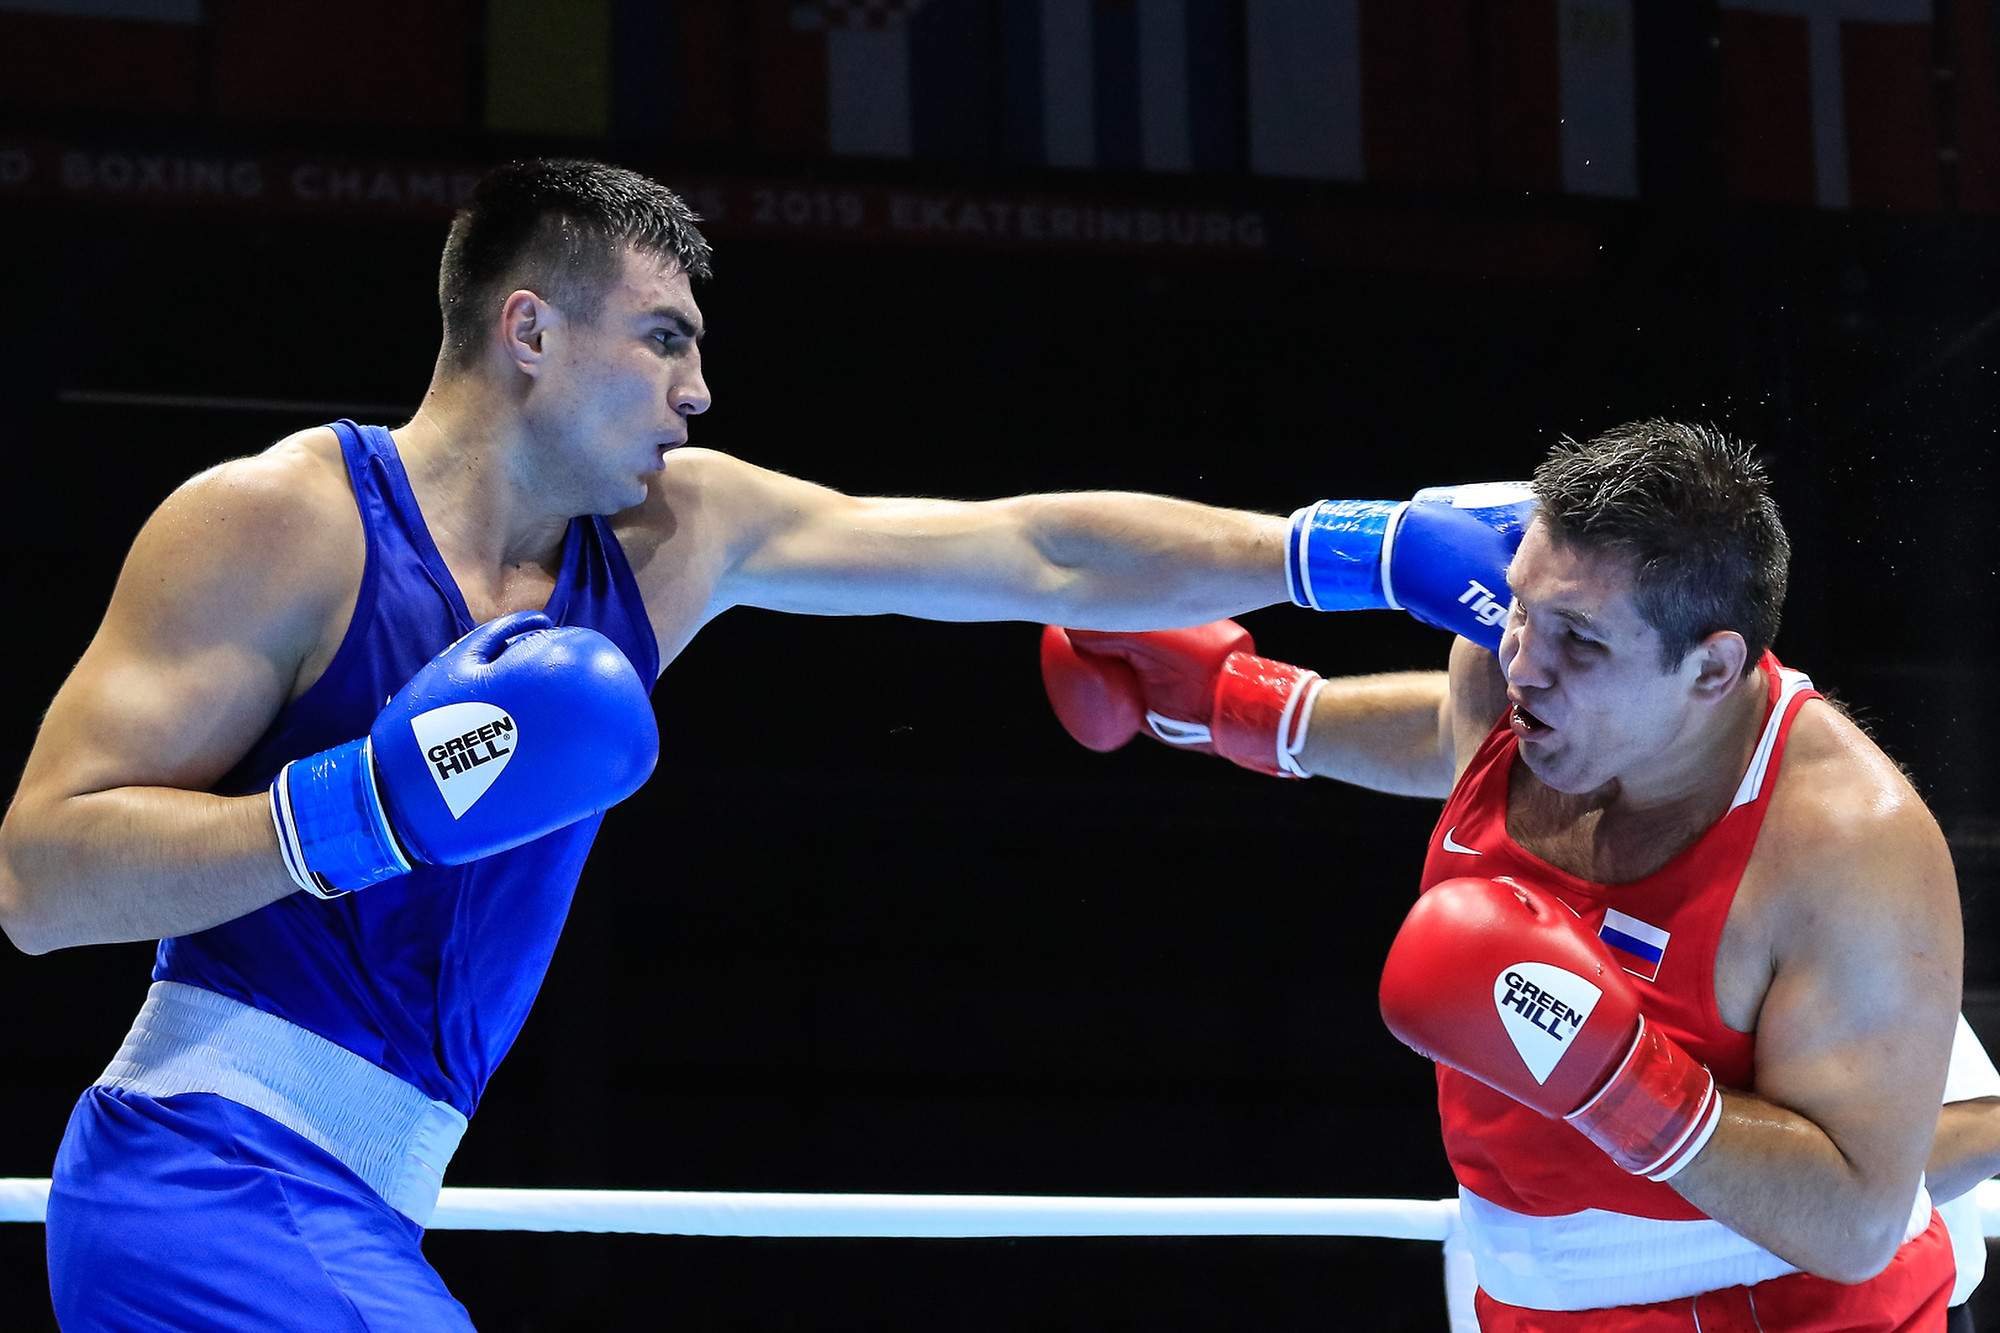 Uzbekistan's Bakhodir Jalolov recorded a unanimous victory against Russia's Maksim Babanin in the super heavyweight division ©Yekaterinburg 2019